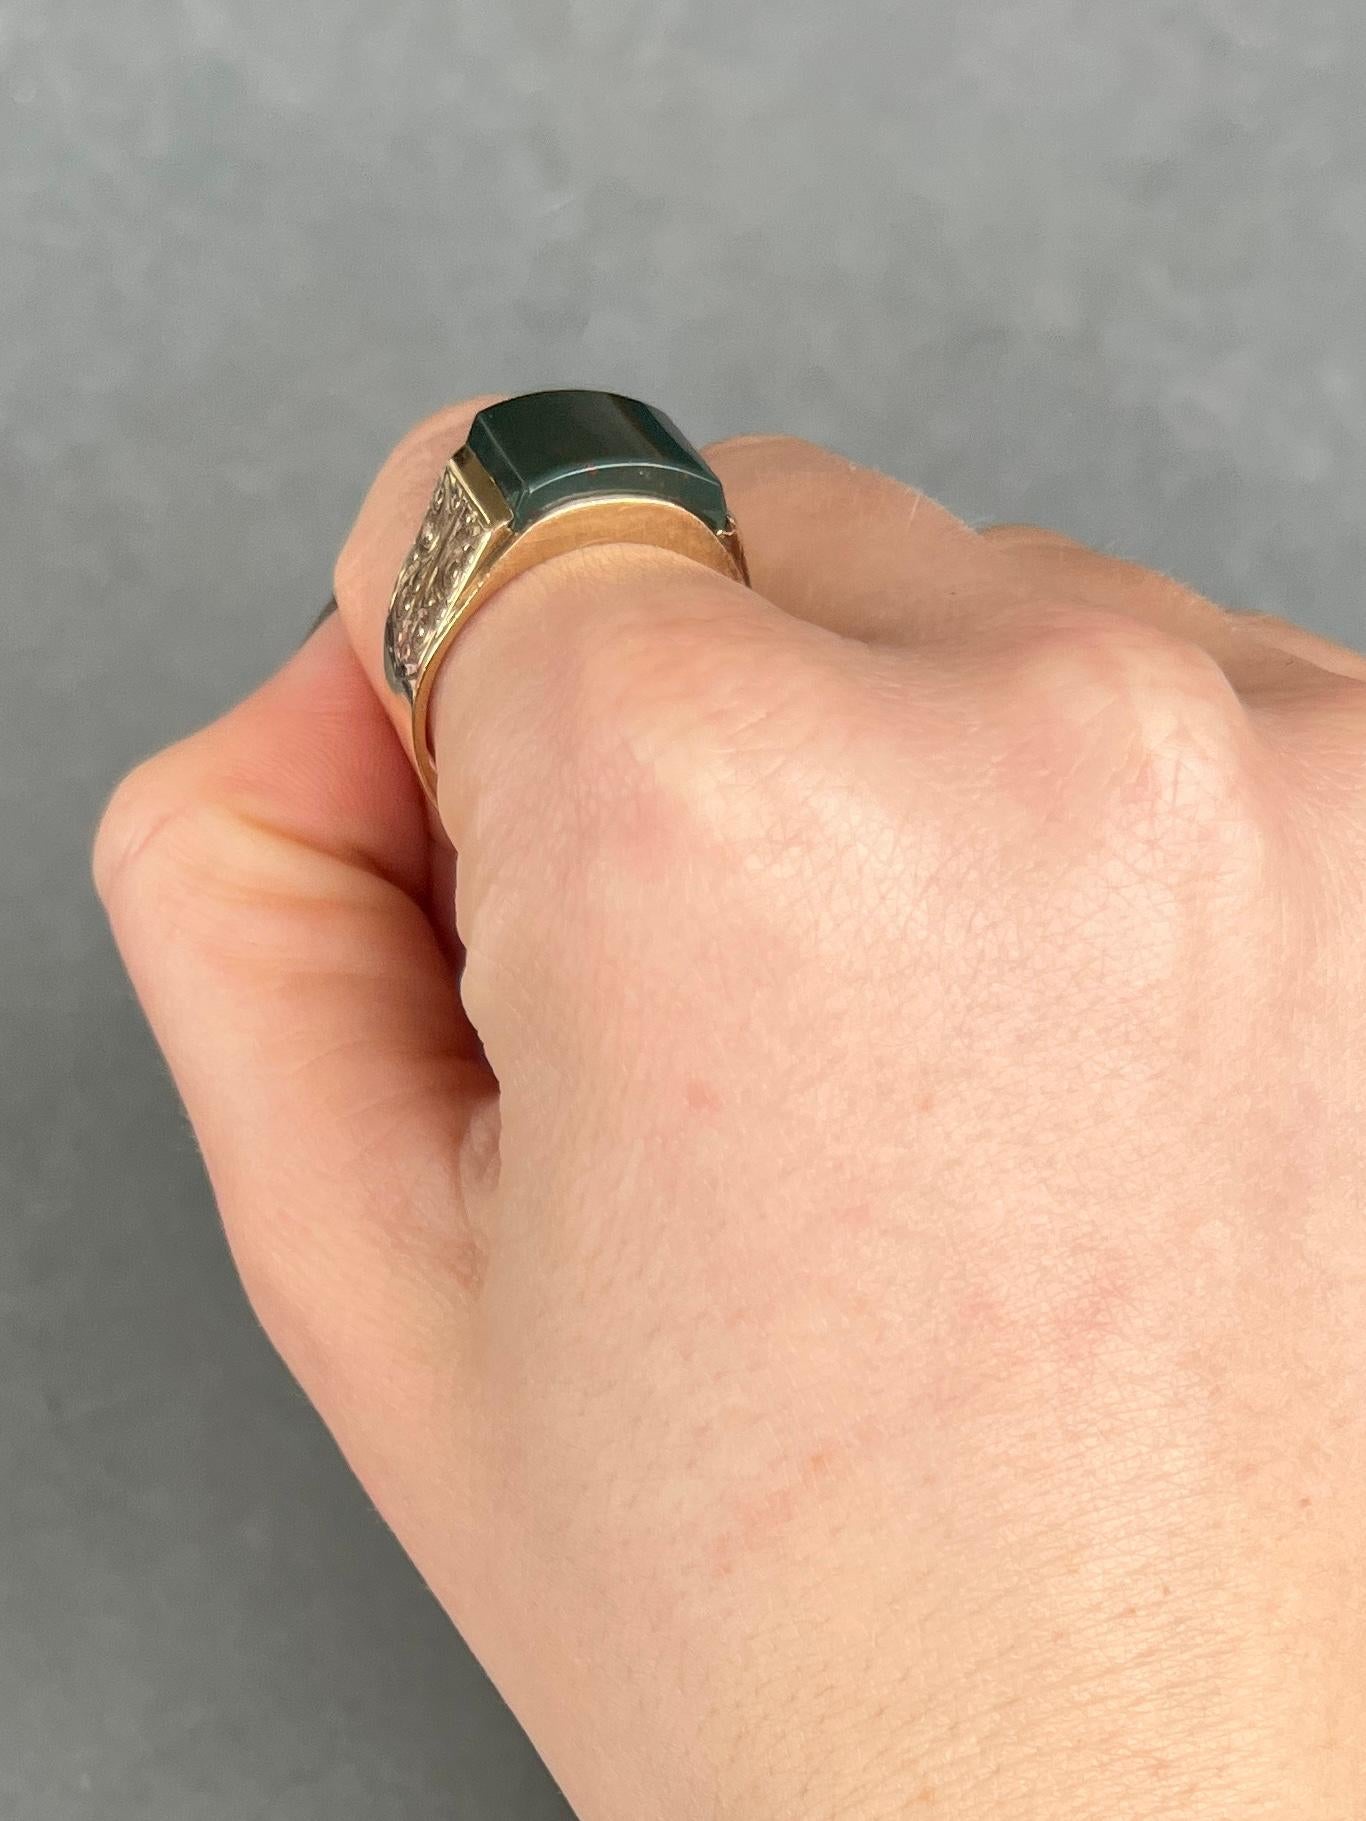 This gorgeous signet ring has a curved bloodstone set flush within the 9carat gold band. The stone is deep green with flecks of red running through and the shoulders of the ring have engraved detail. Hallmarked London 1975.

Ring Size: T 1/2 or 9